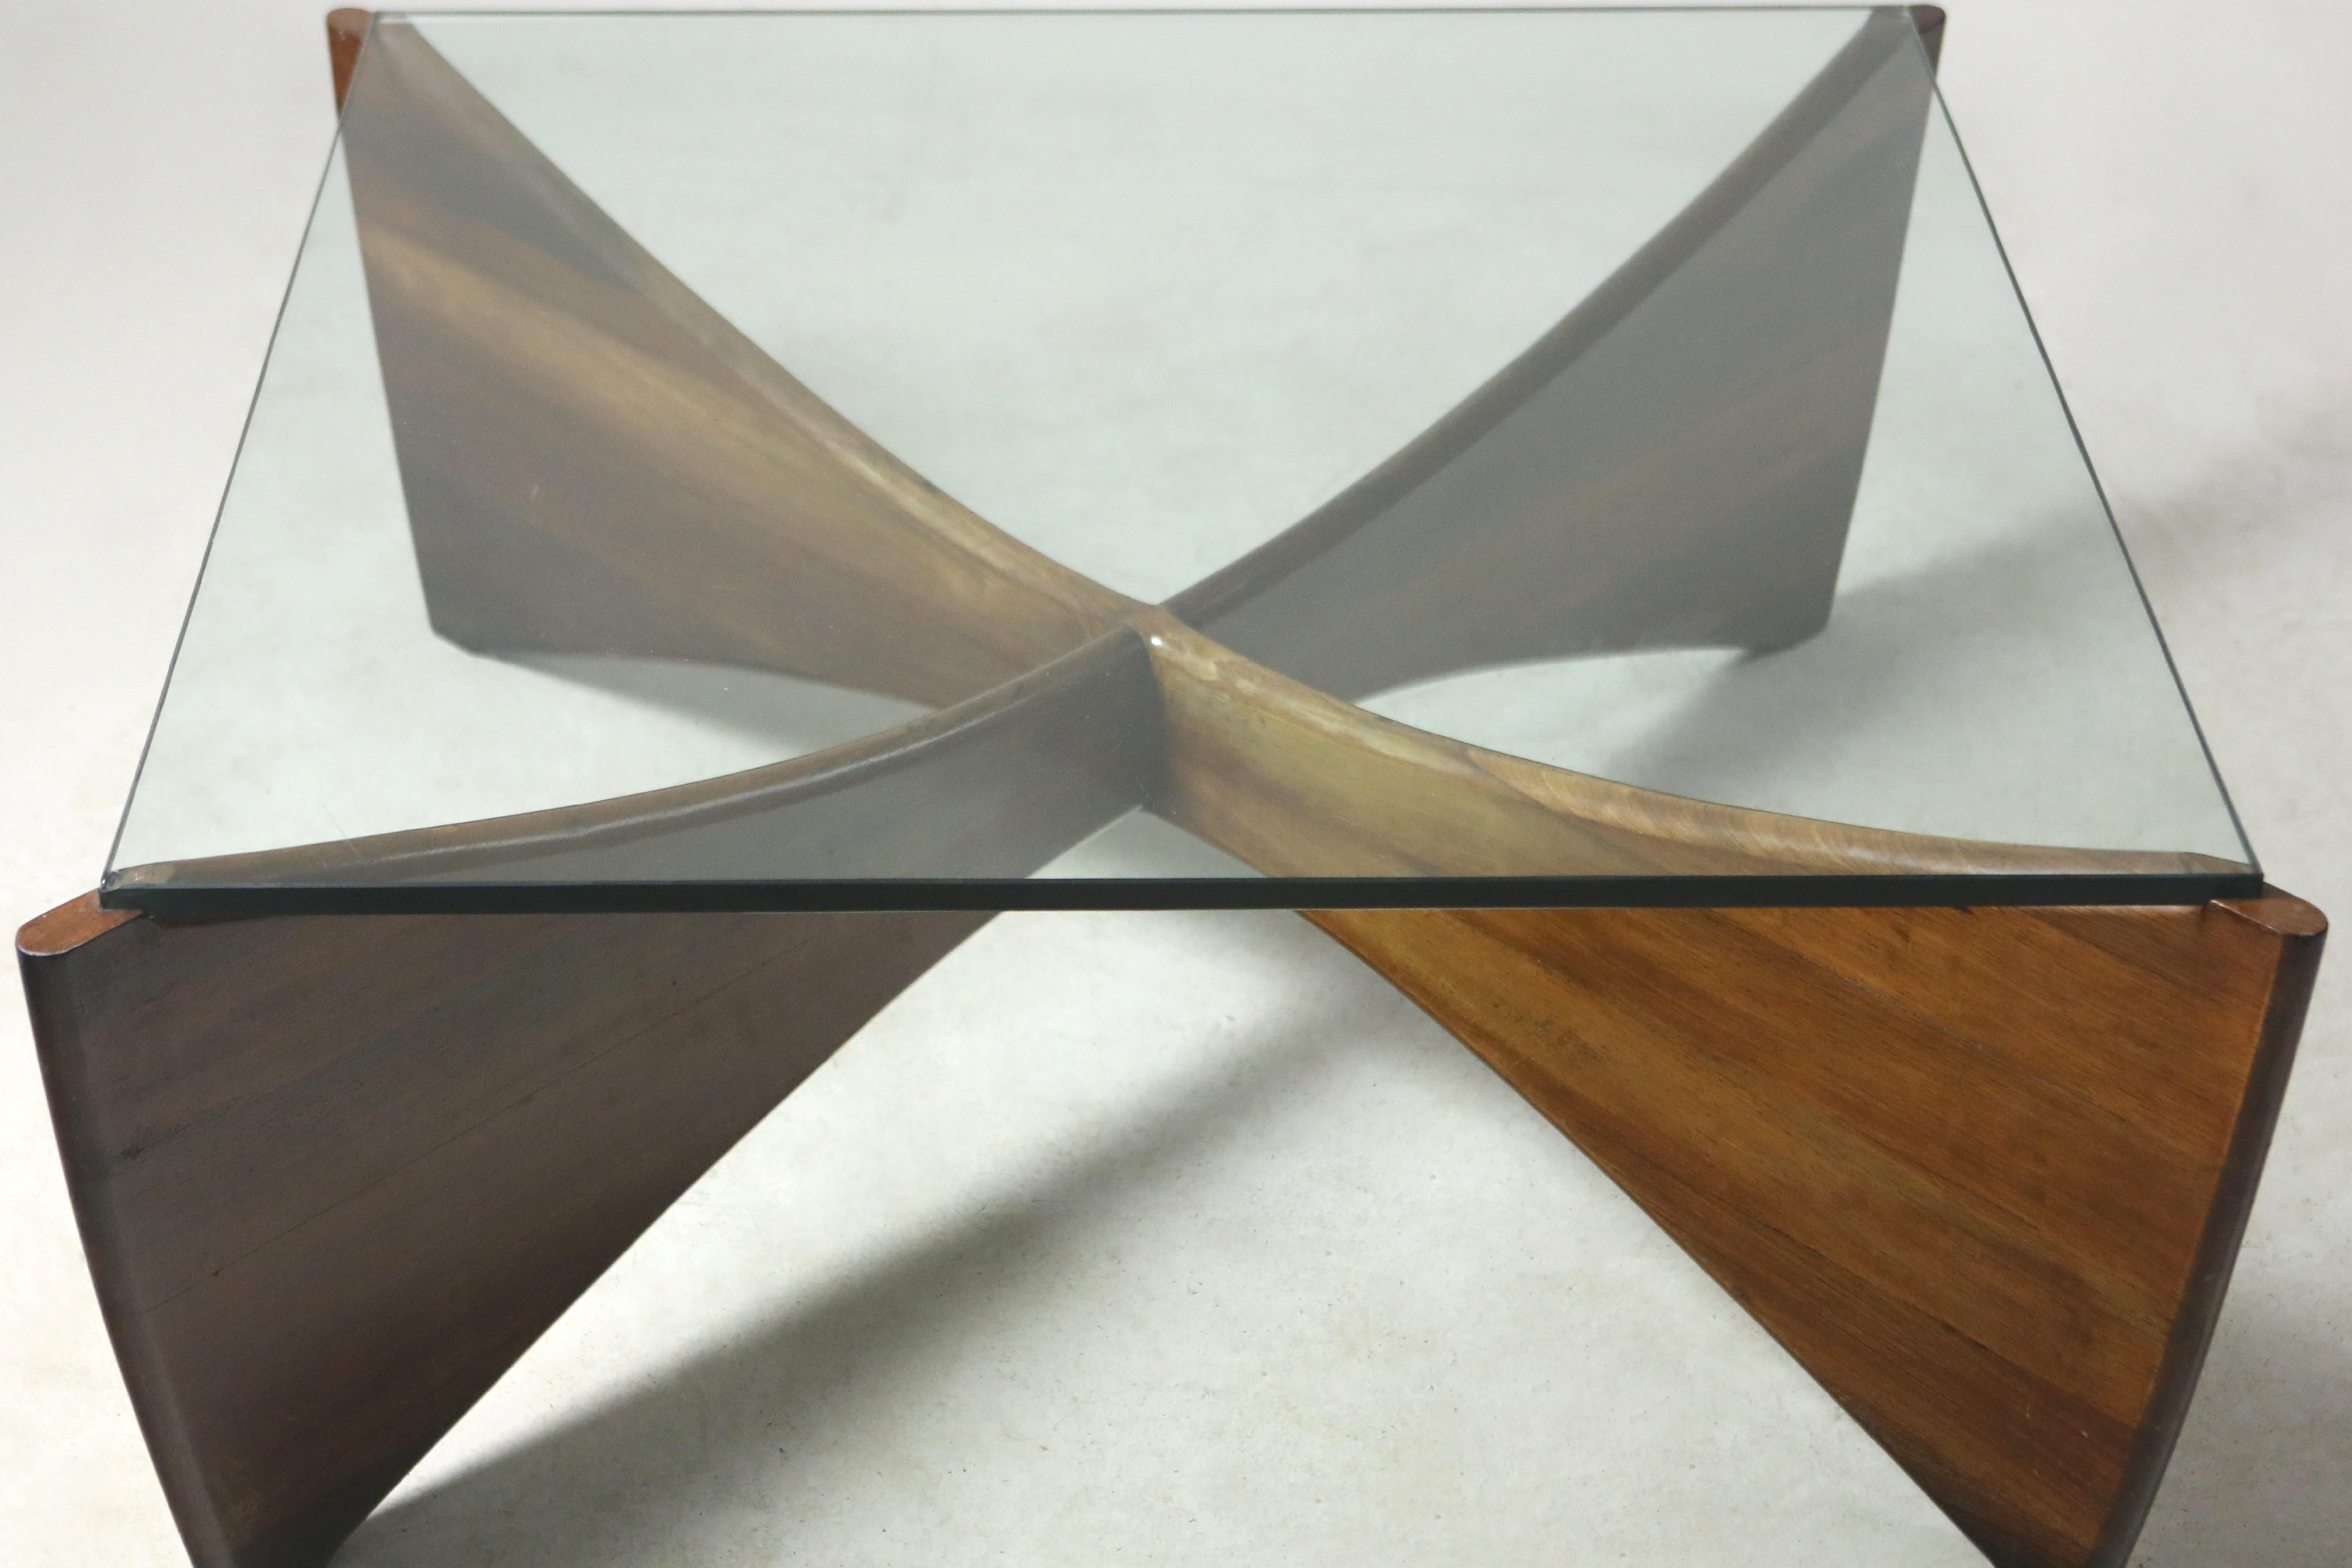 Varnished Mid-Century Modern Square Table by Mobília Contemporânea, Brazil, 1950s For Sale